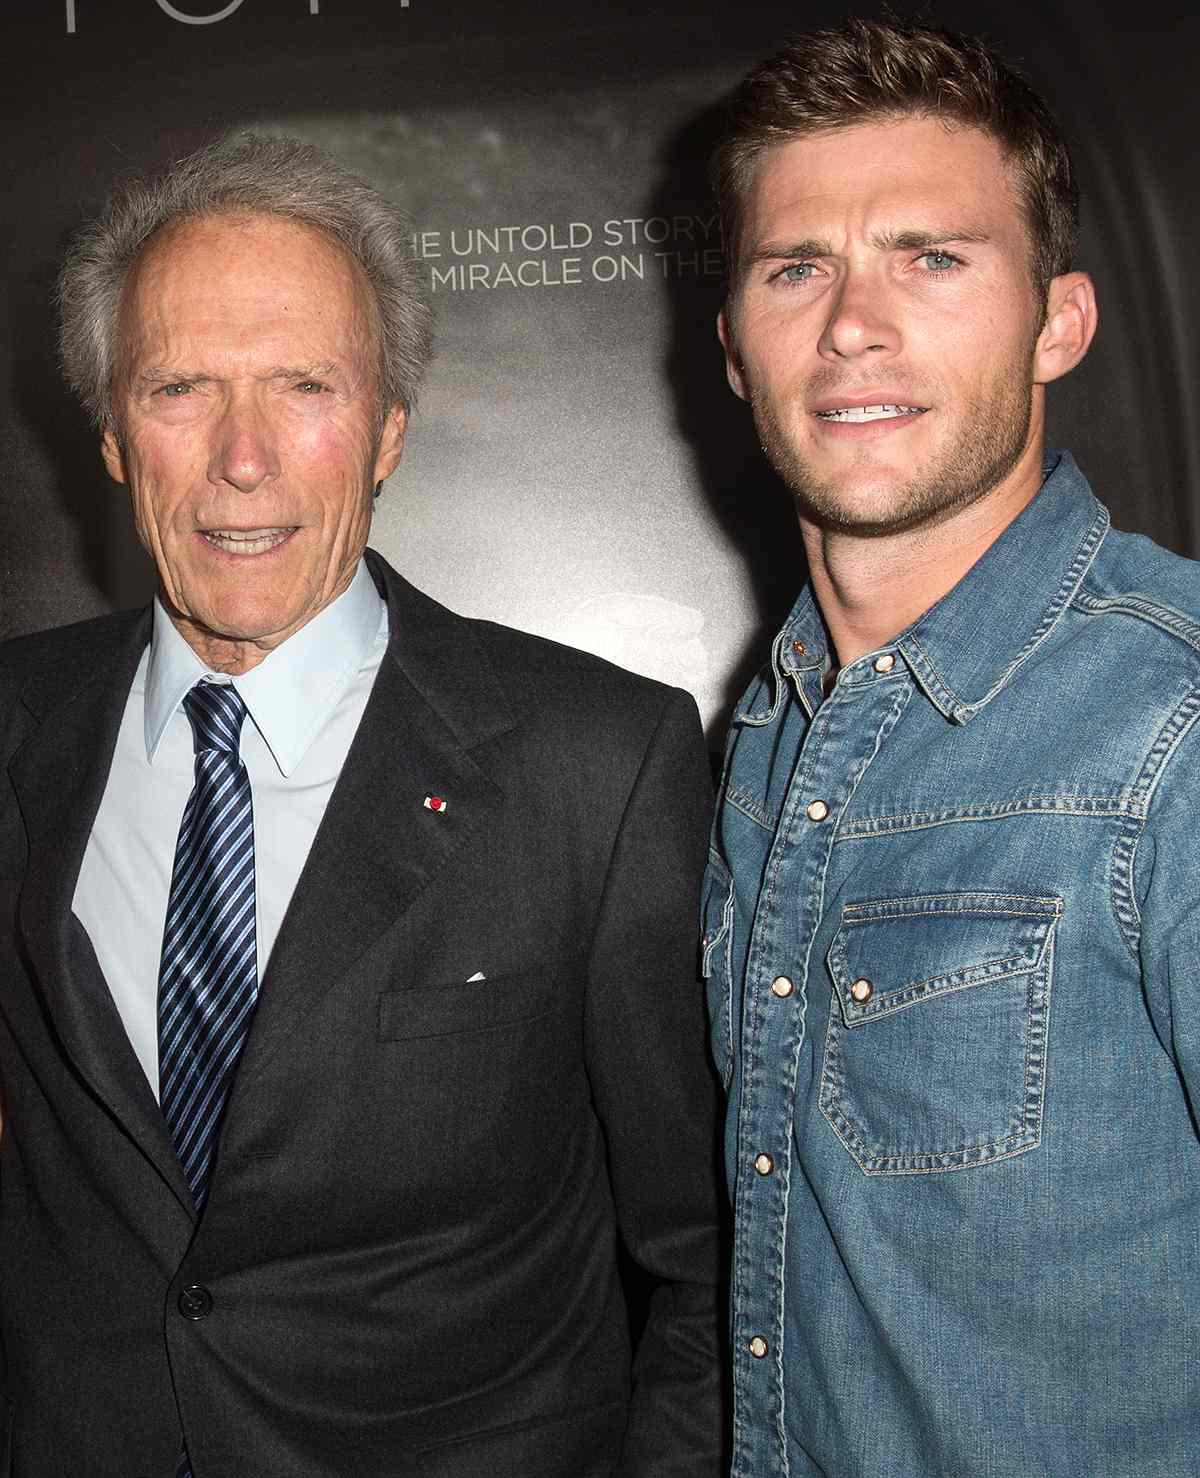 Clint Eastwood alive and kicking